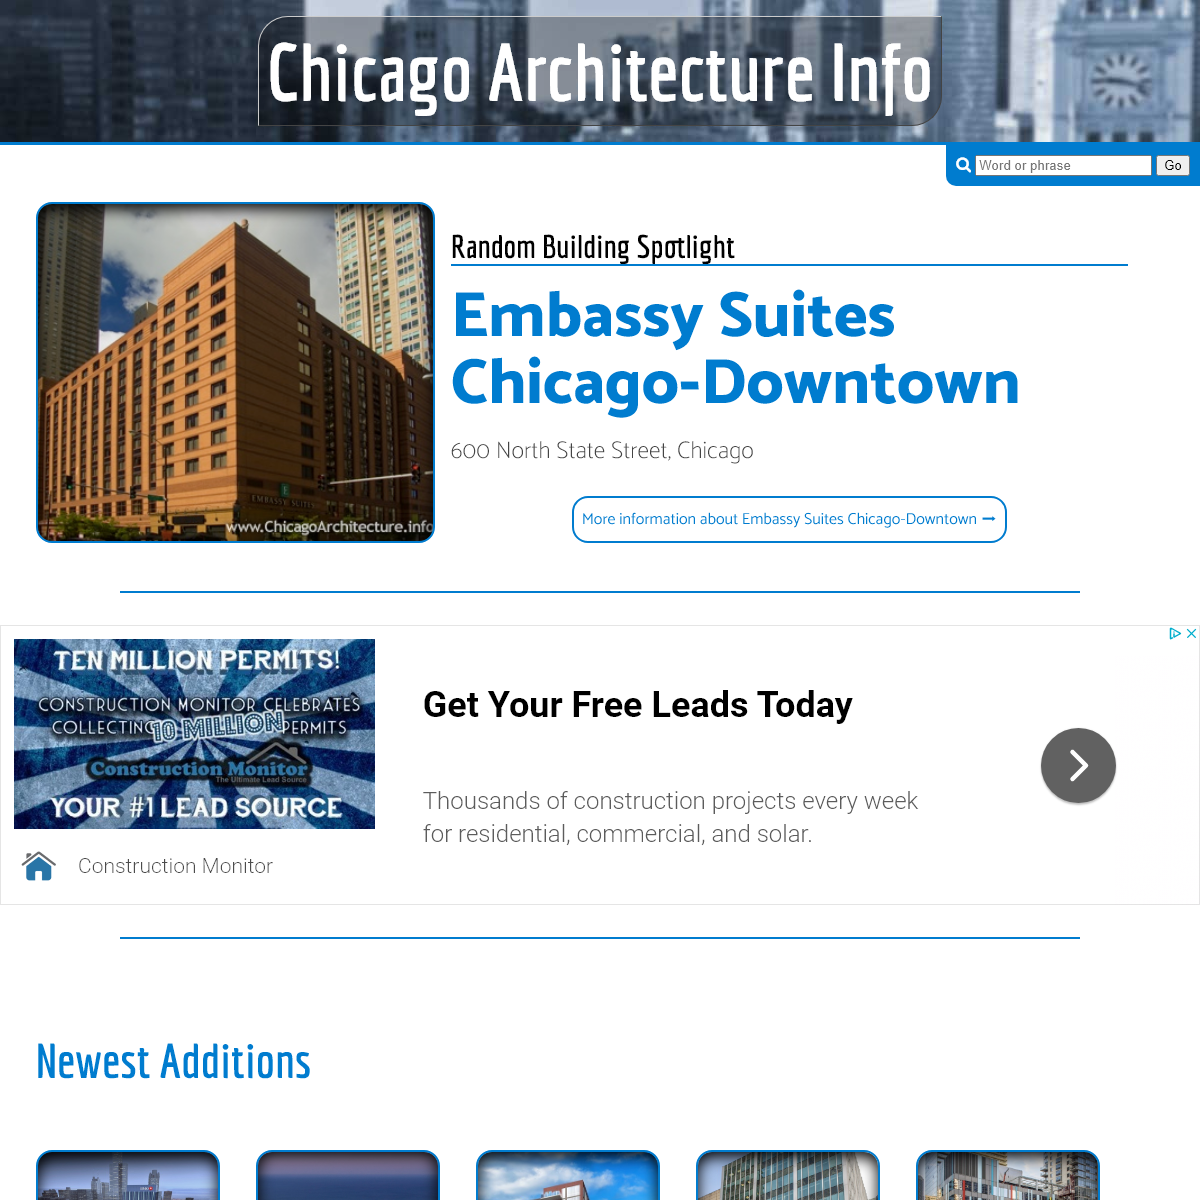 A complete backup of chicagoarchitecture.info